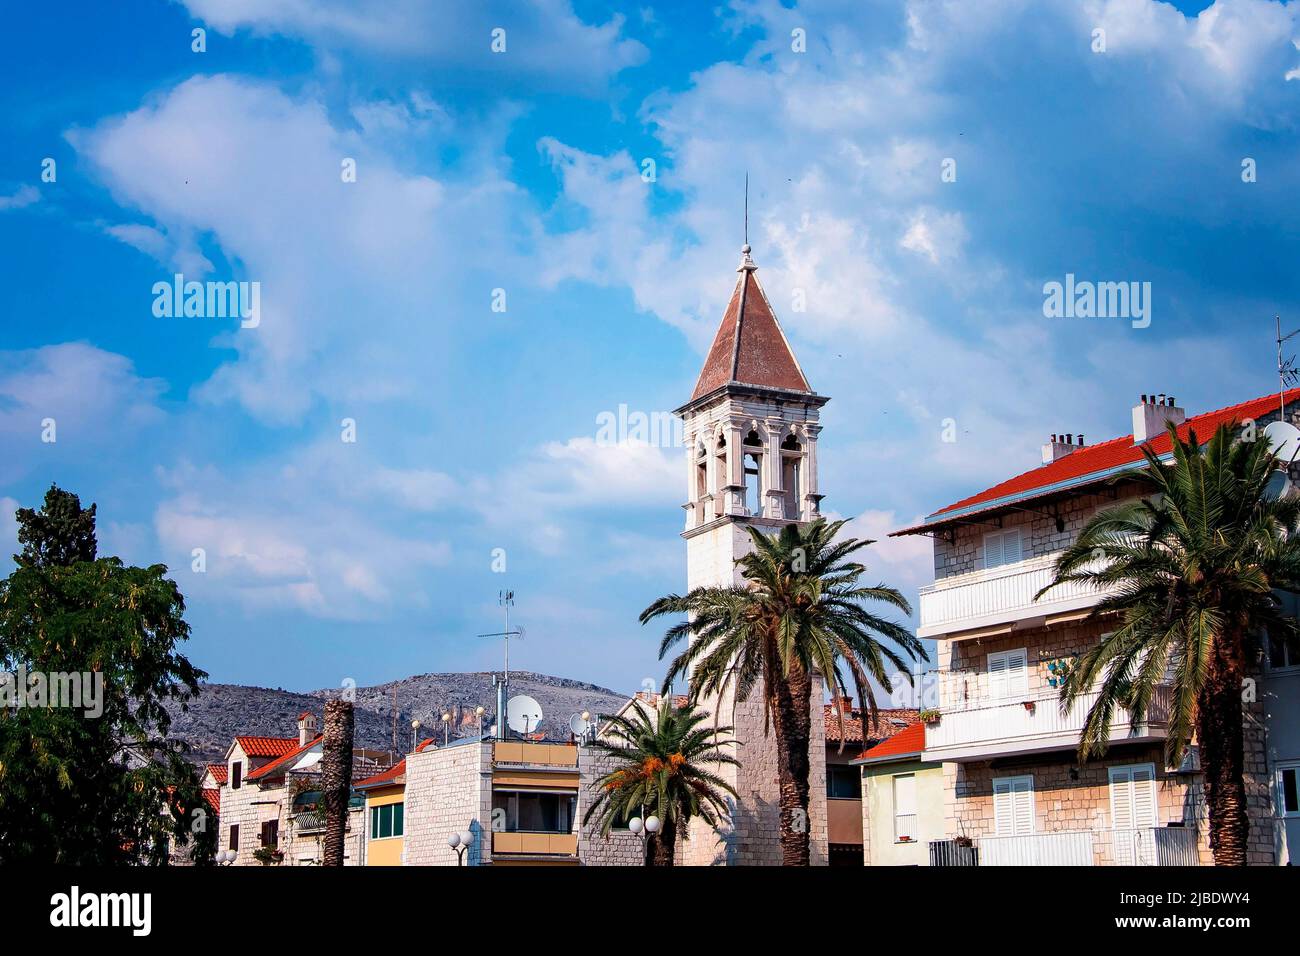 Close up view of town hall on sunny promenade along the pier of old Venetian town, Trogir, Croatia. Stock Photo